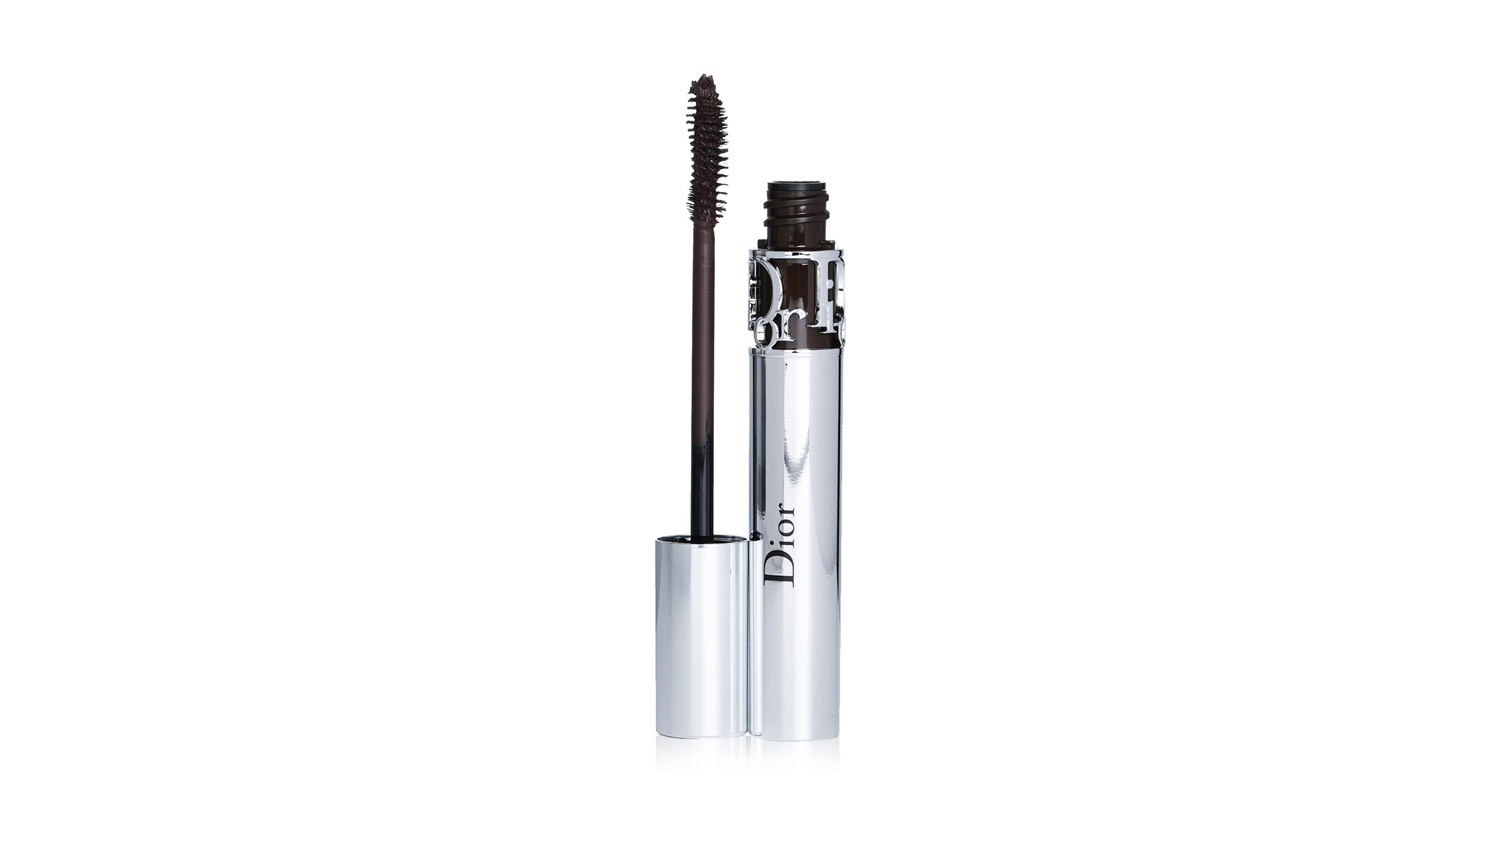 Mascara Monday Dior Diorshow Iconic Overcurl Mascara Review  Demonstration   YouTube